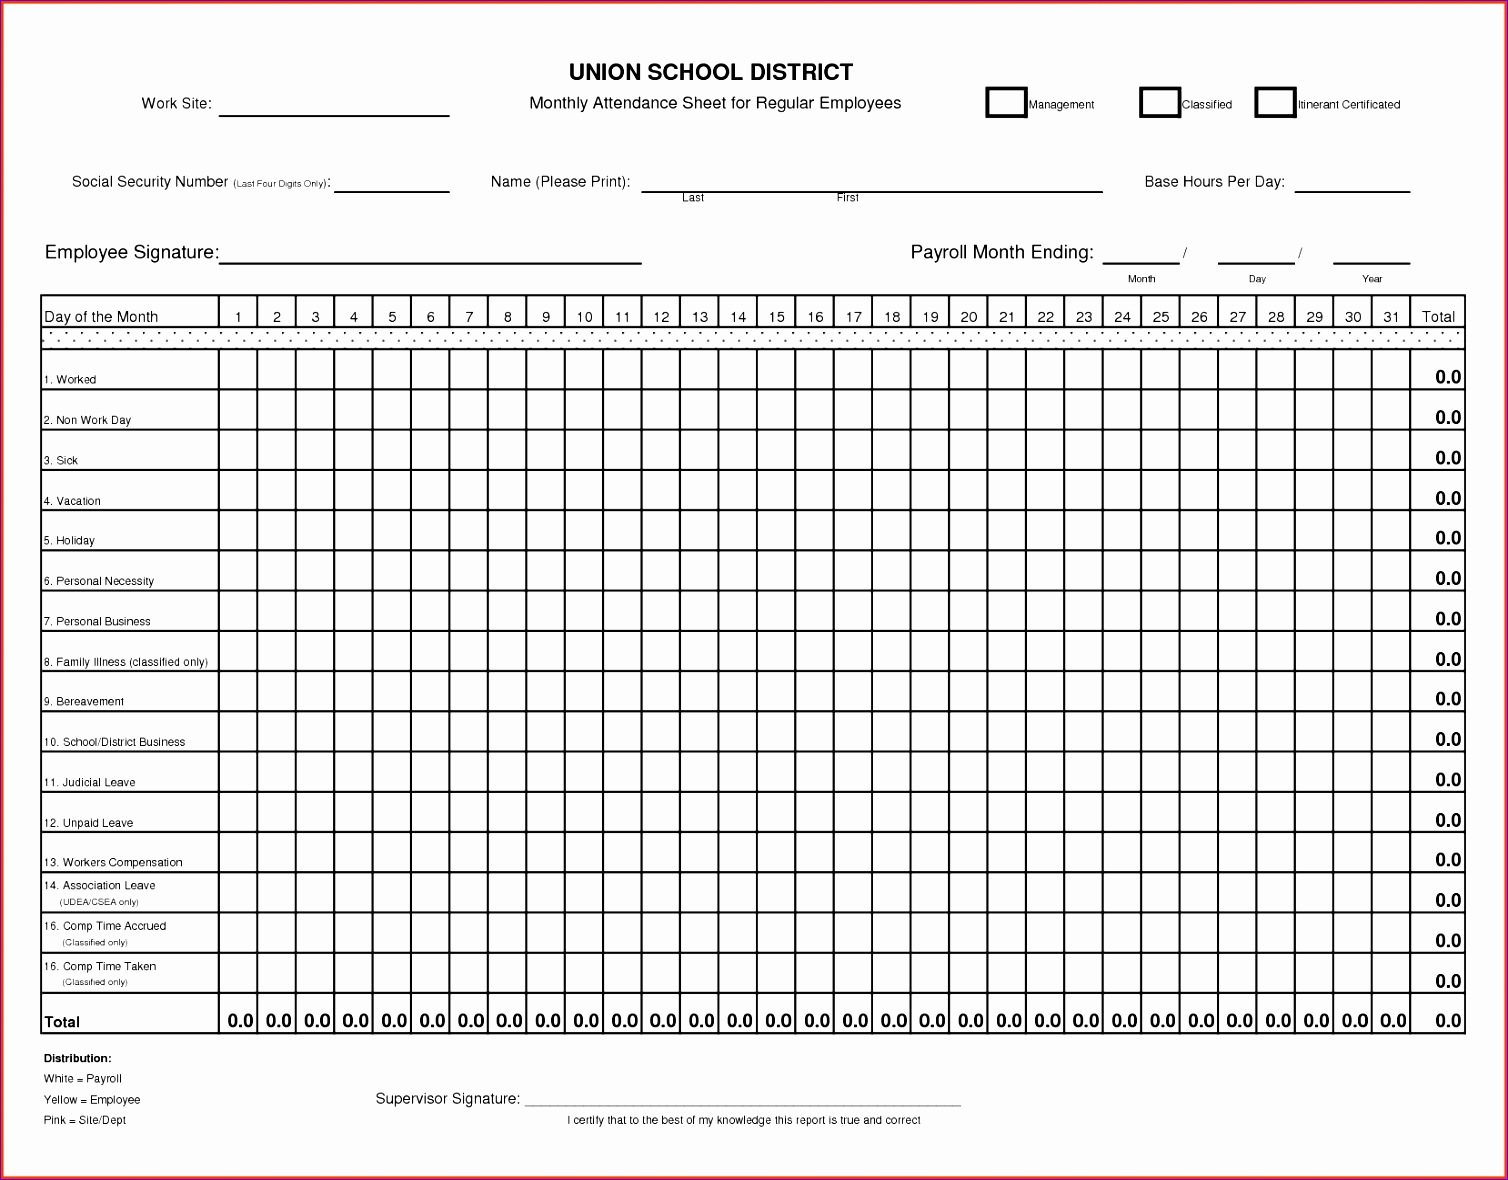 excel attendance sheet template sample customer service resume printable format in time clock mts 14 free sheets survey word accounting balance spreadsheet appointment sign up book